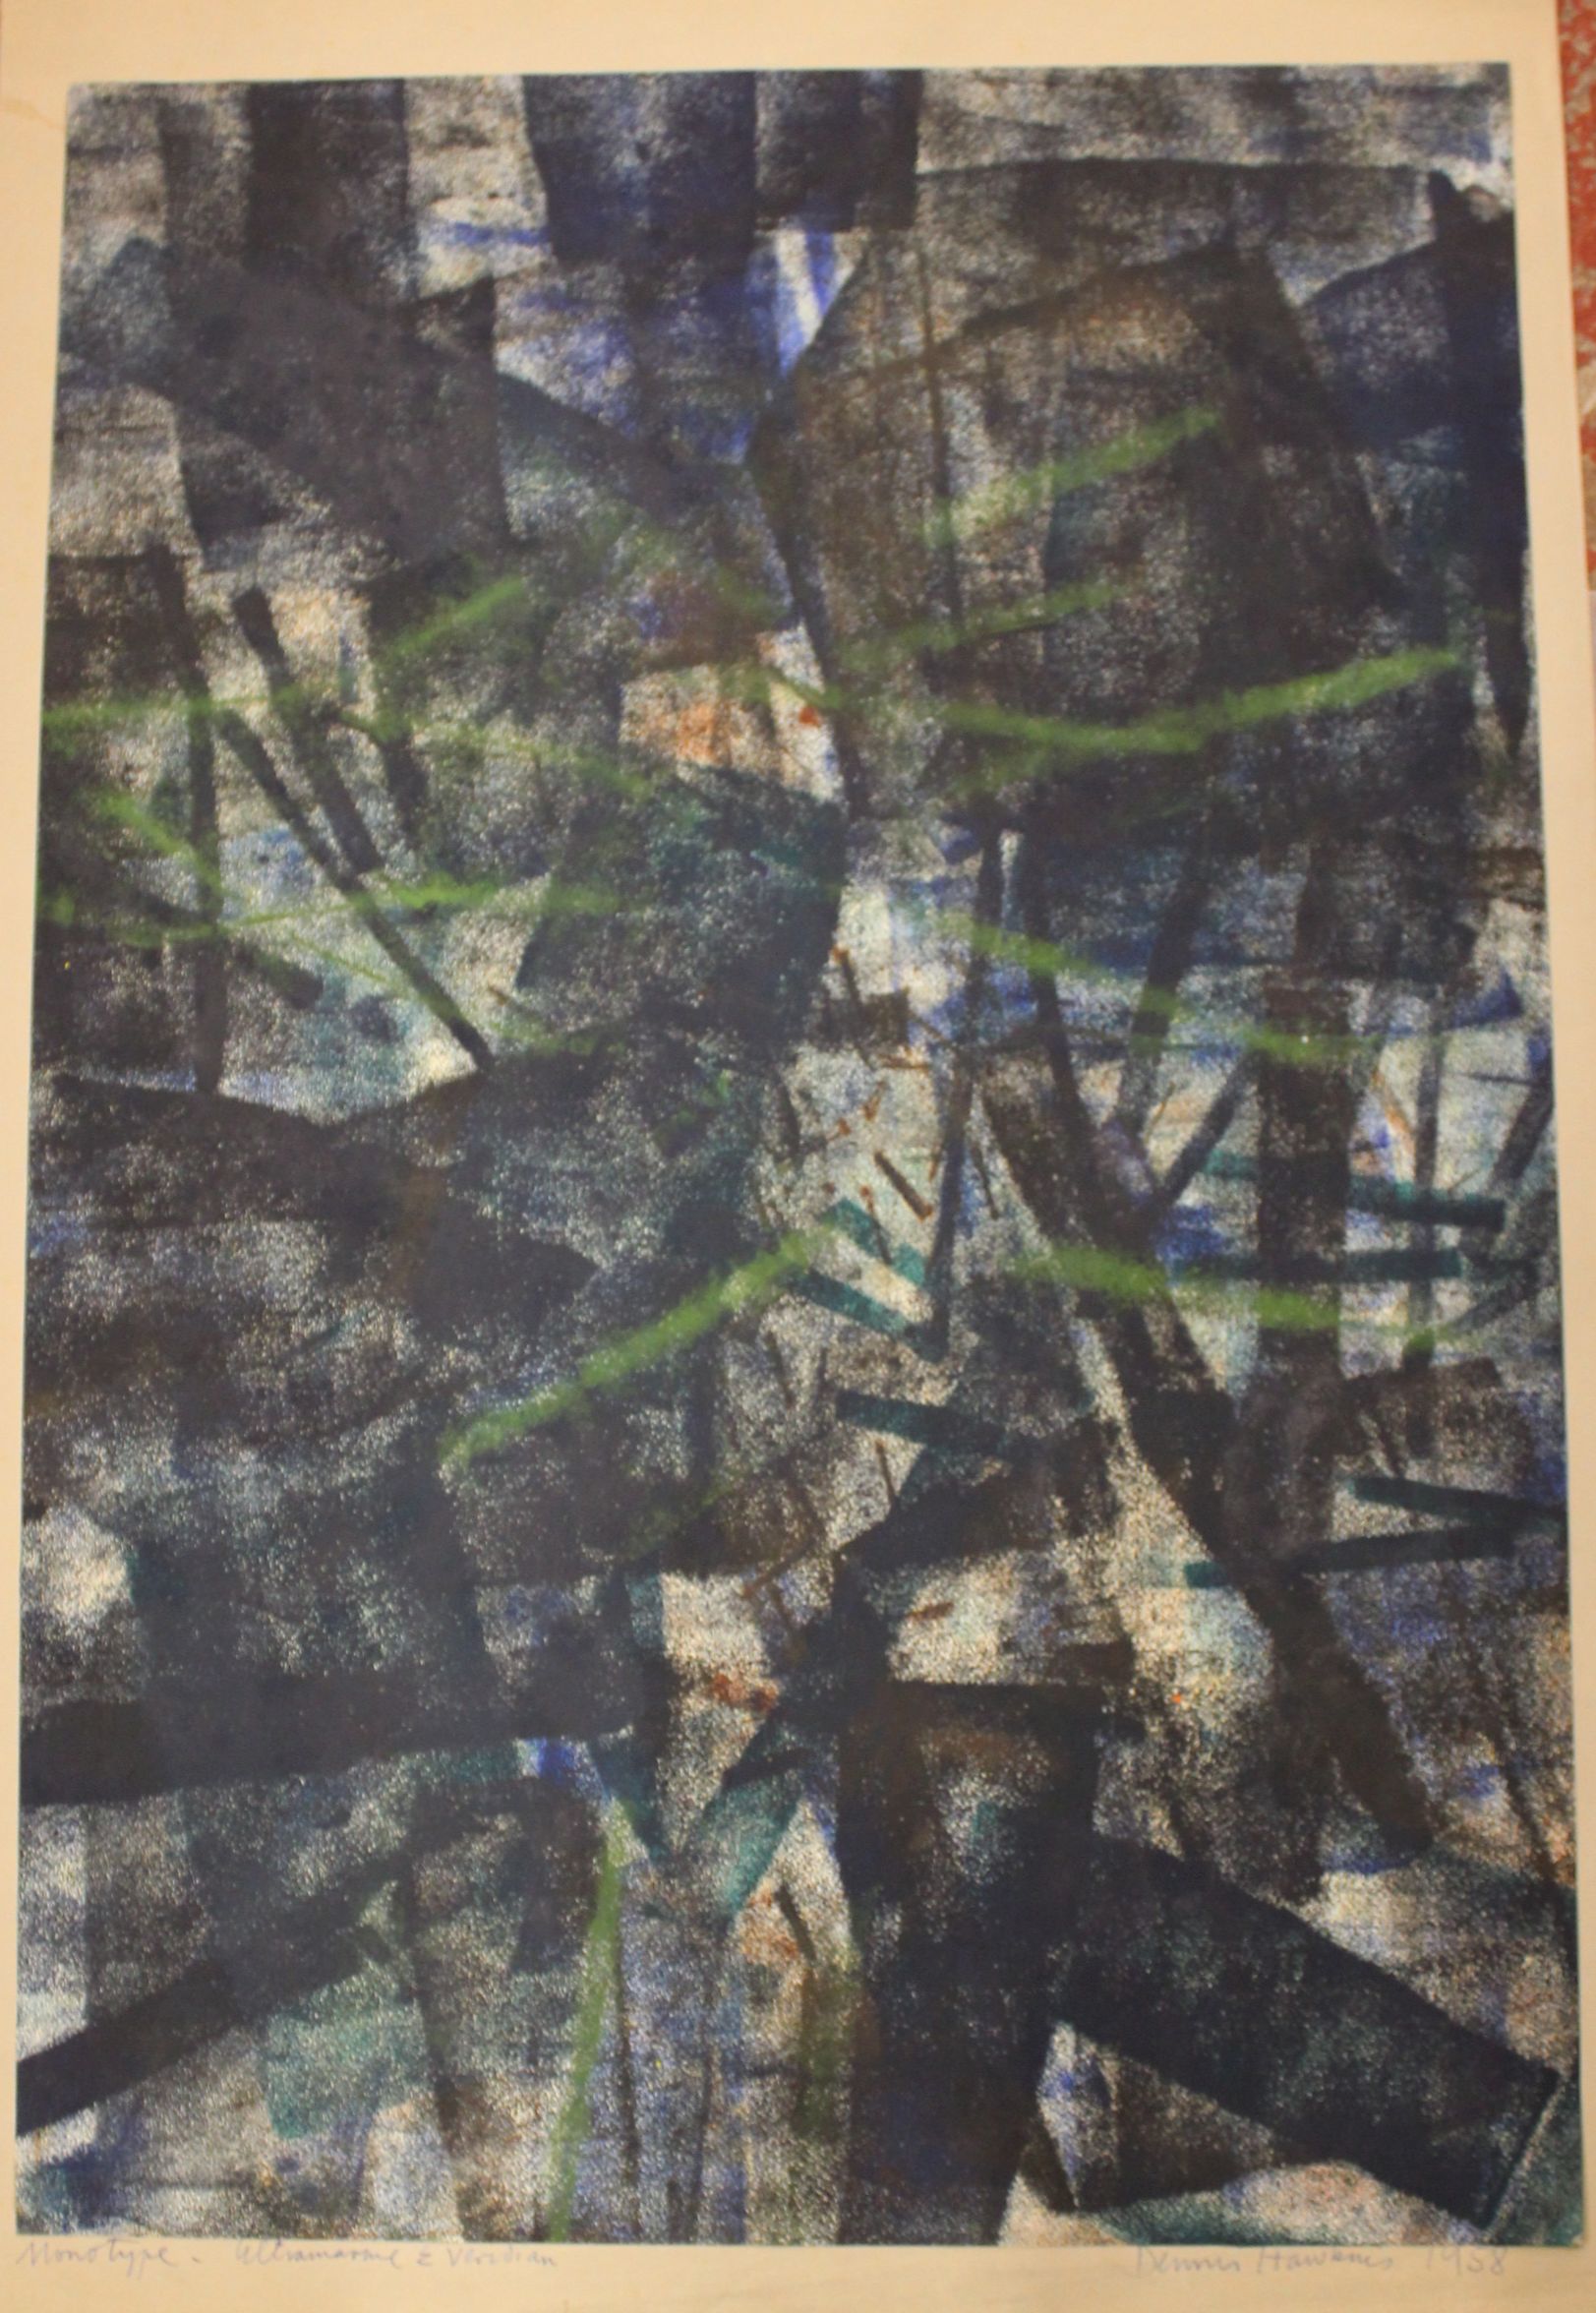 Denis HawkinsUltramarine & VeridianMonotype print70 x 48cm, signed and dated lower right, 1958